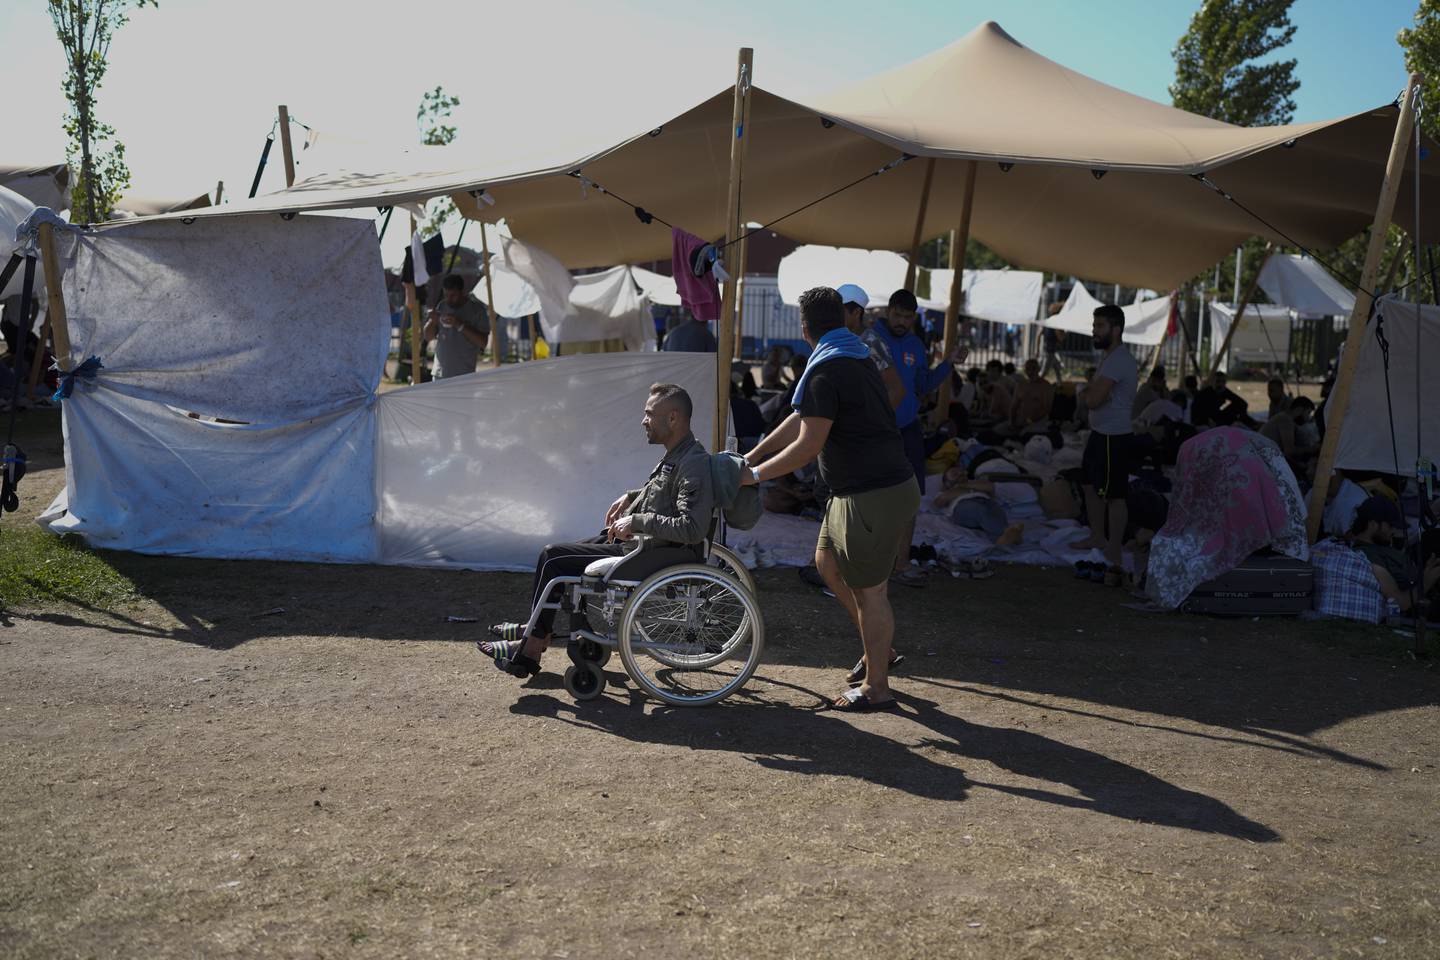 MSF national director Judith Sargentini compared the situation to overcrowded migrant camps in Greece. AP